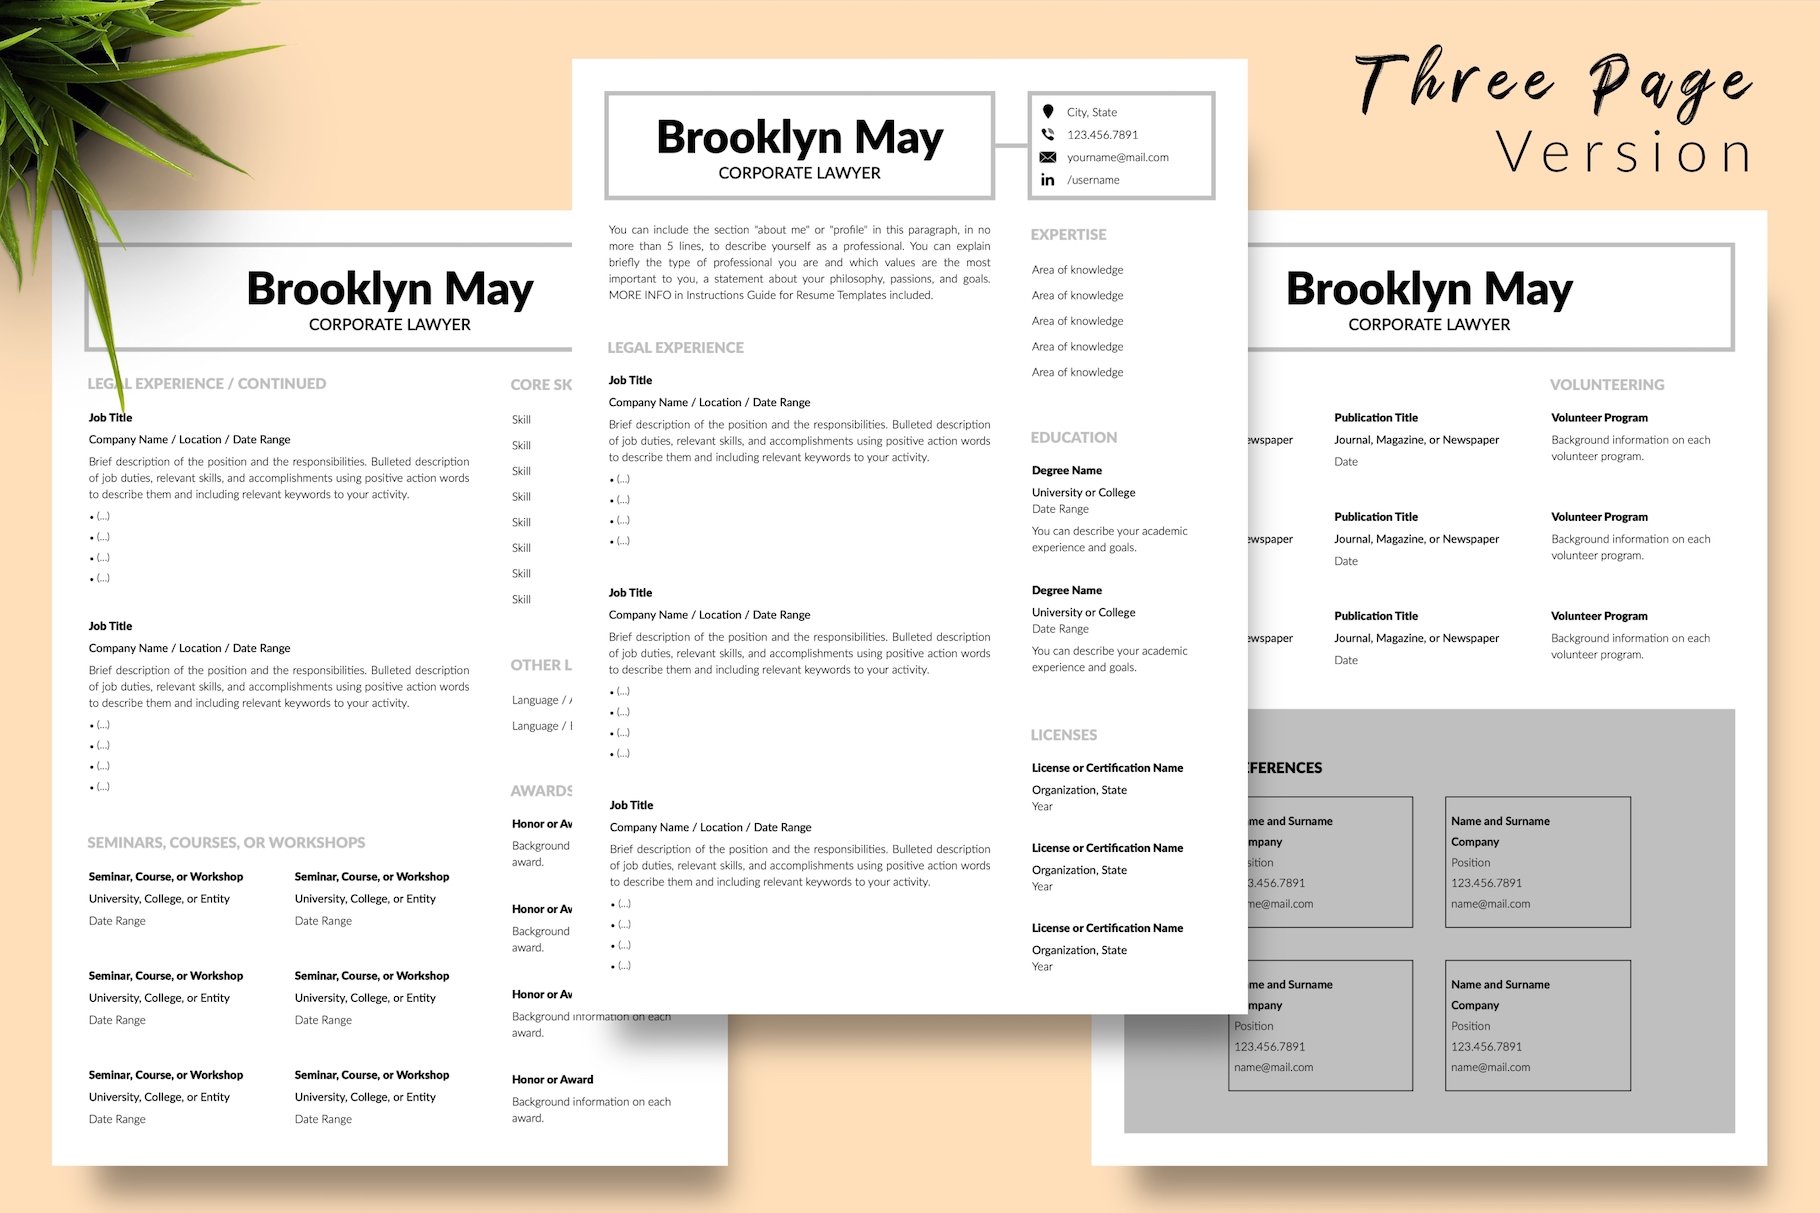 resume cv template brooklyn may for creative market 04 three page version 87